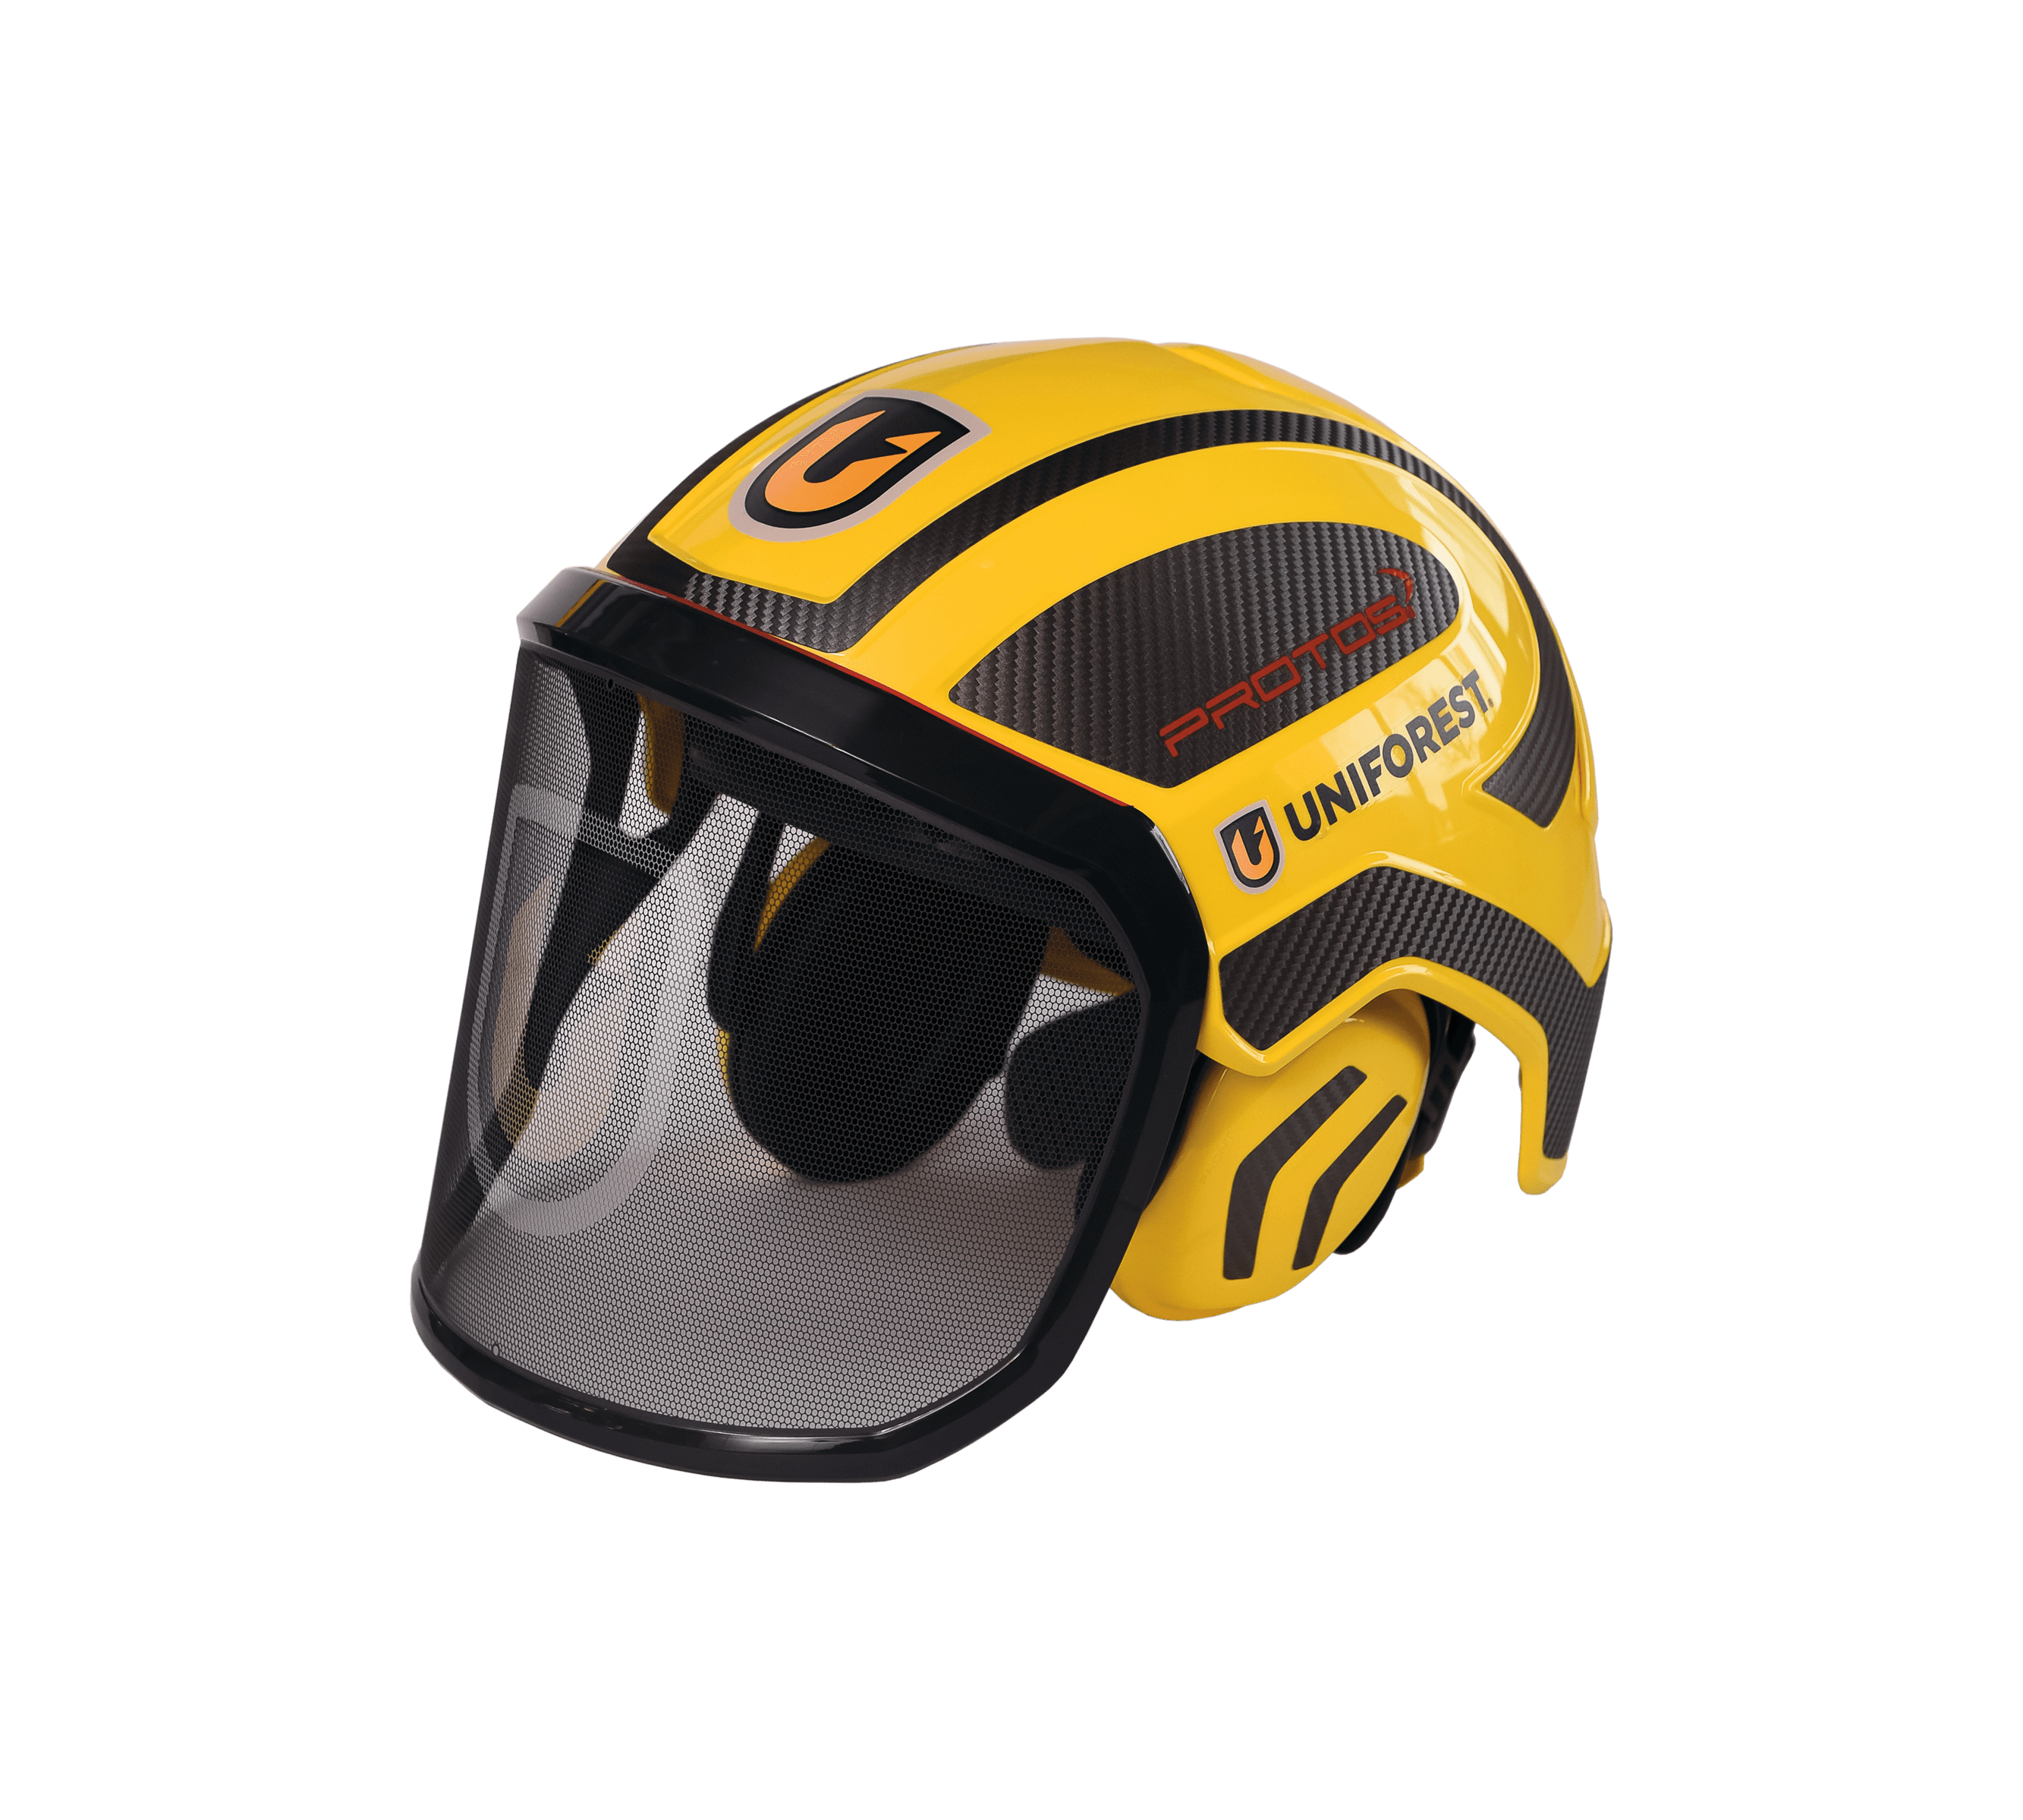 CASCO FORESTALE PFANNER PROTOS INTEGRAL FOREST